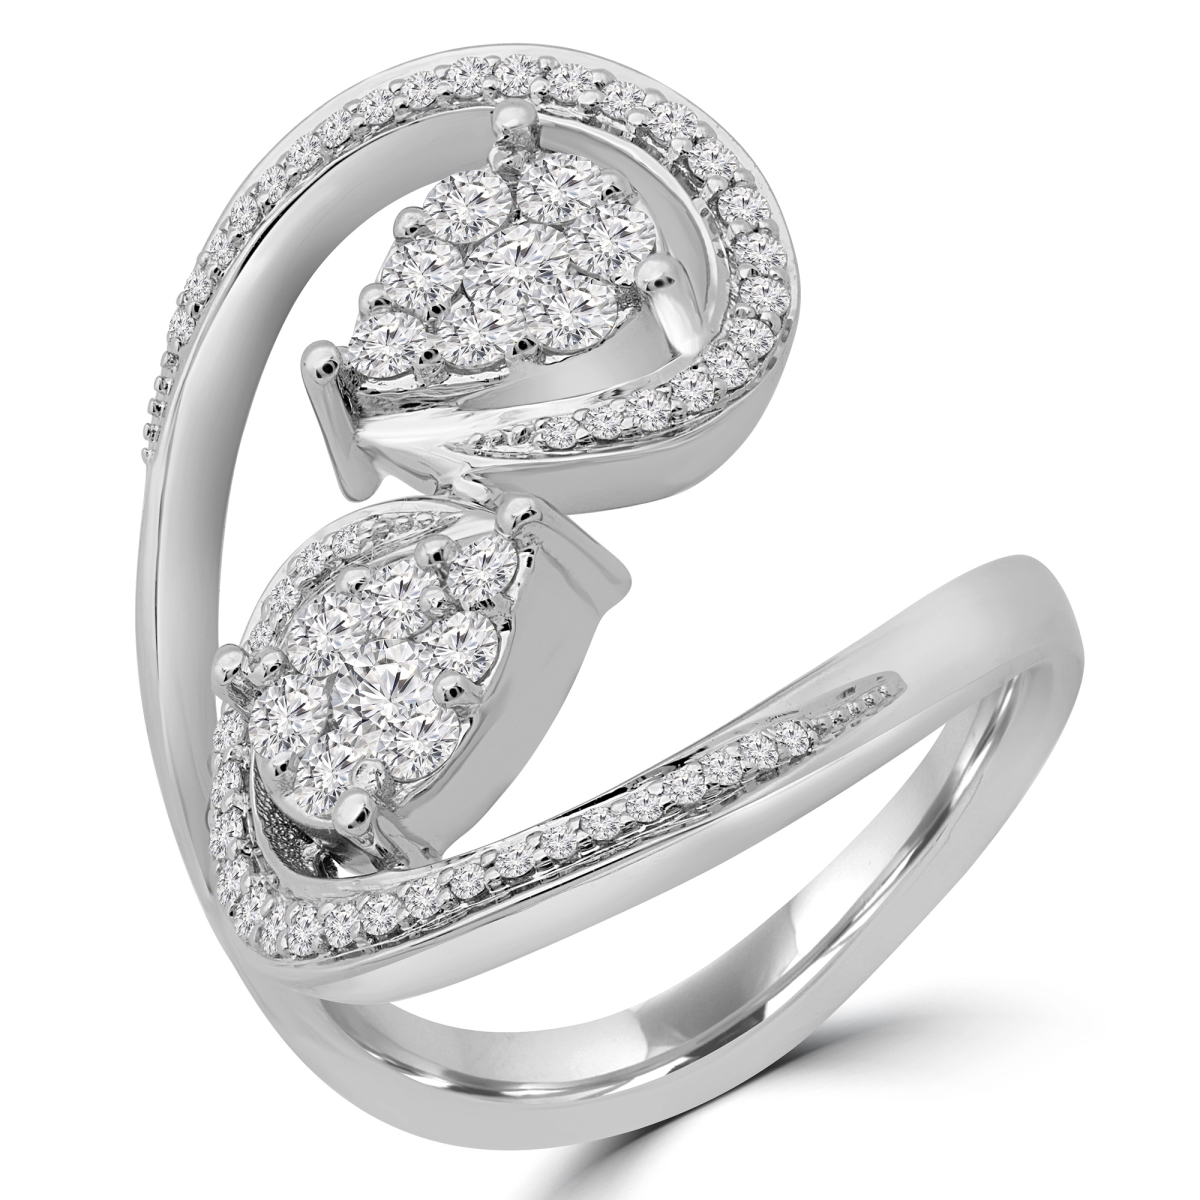 Picture of Majesty Diamonds MDR190070-P 0.67 CTW Round Diamond Swirl Pear Cluster Ring in 14K White Gold